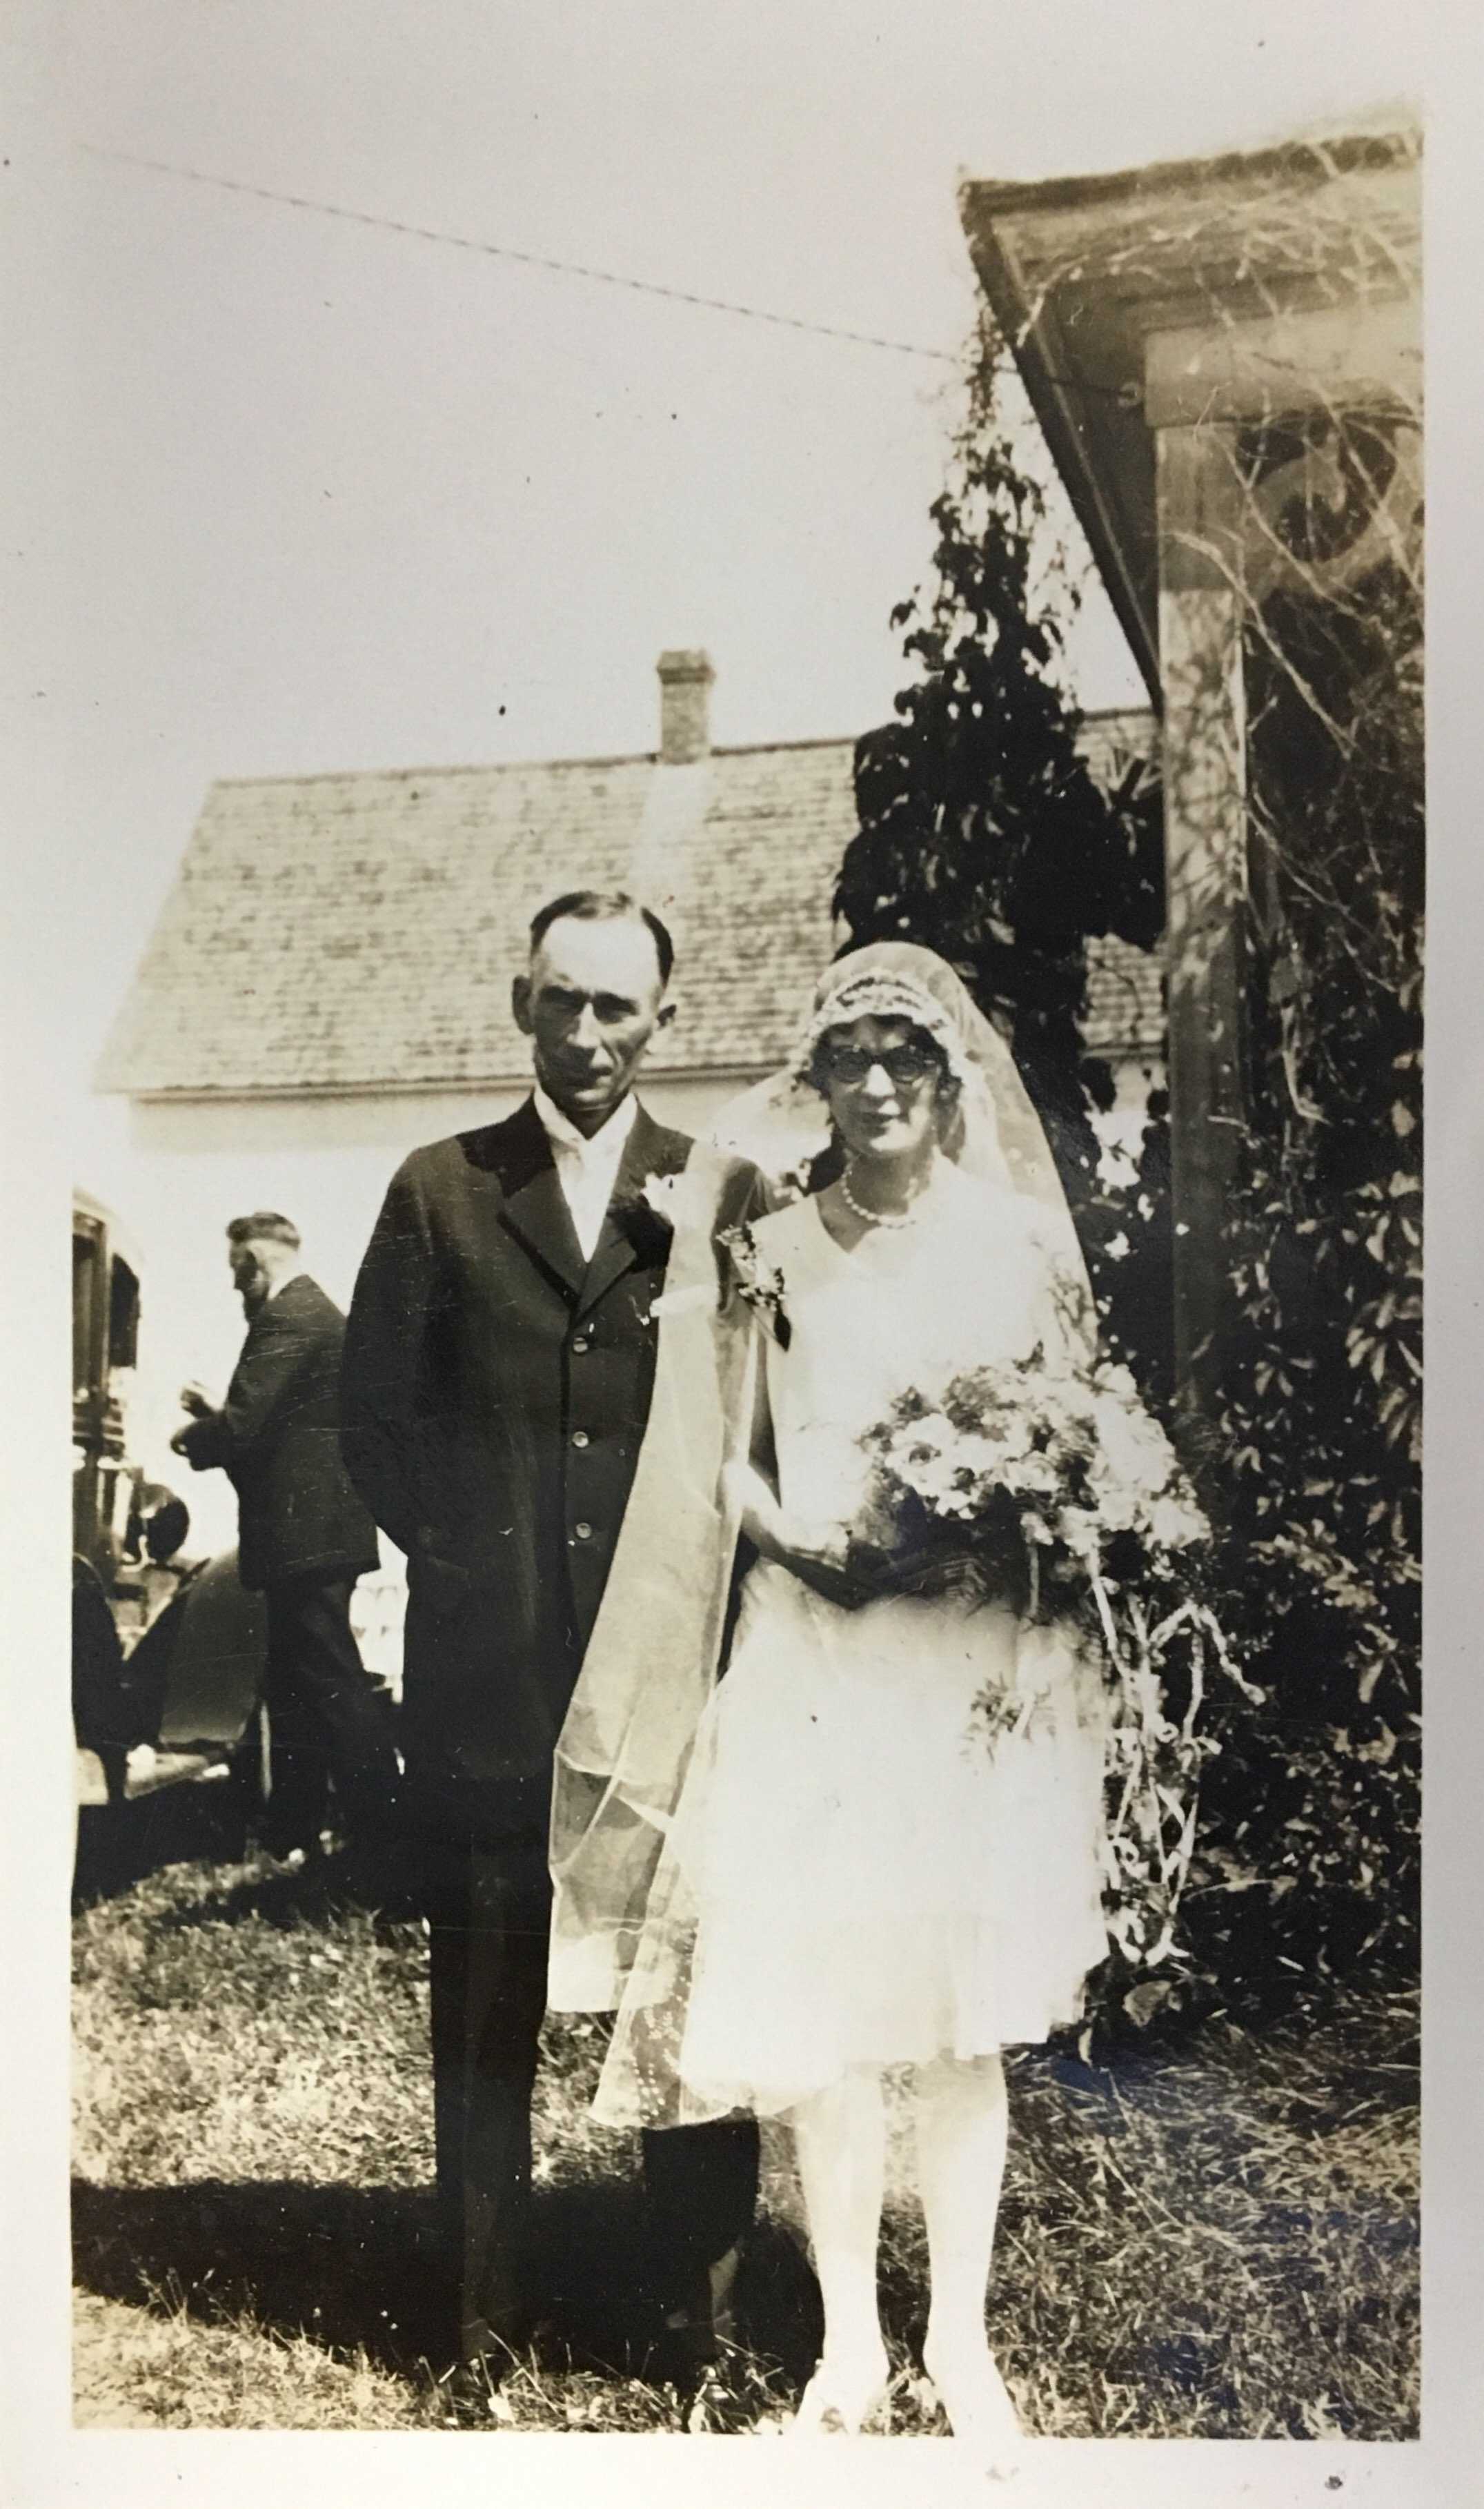 Black and white photograph. Archie and Grace pose for the camera after their wedding. Archie wears a suit, and Grace is in a short gown and veil, holding a large bouquet of flowers.